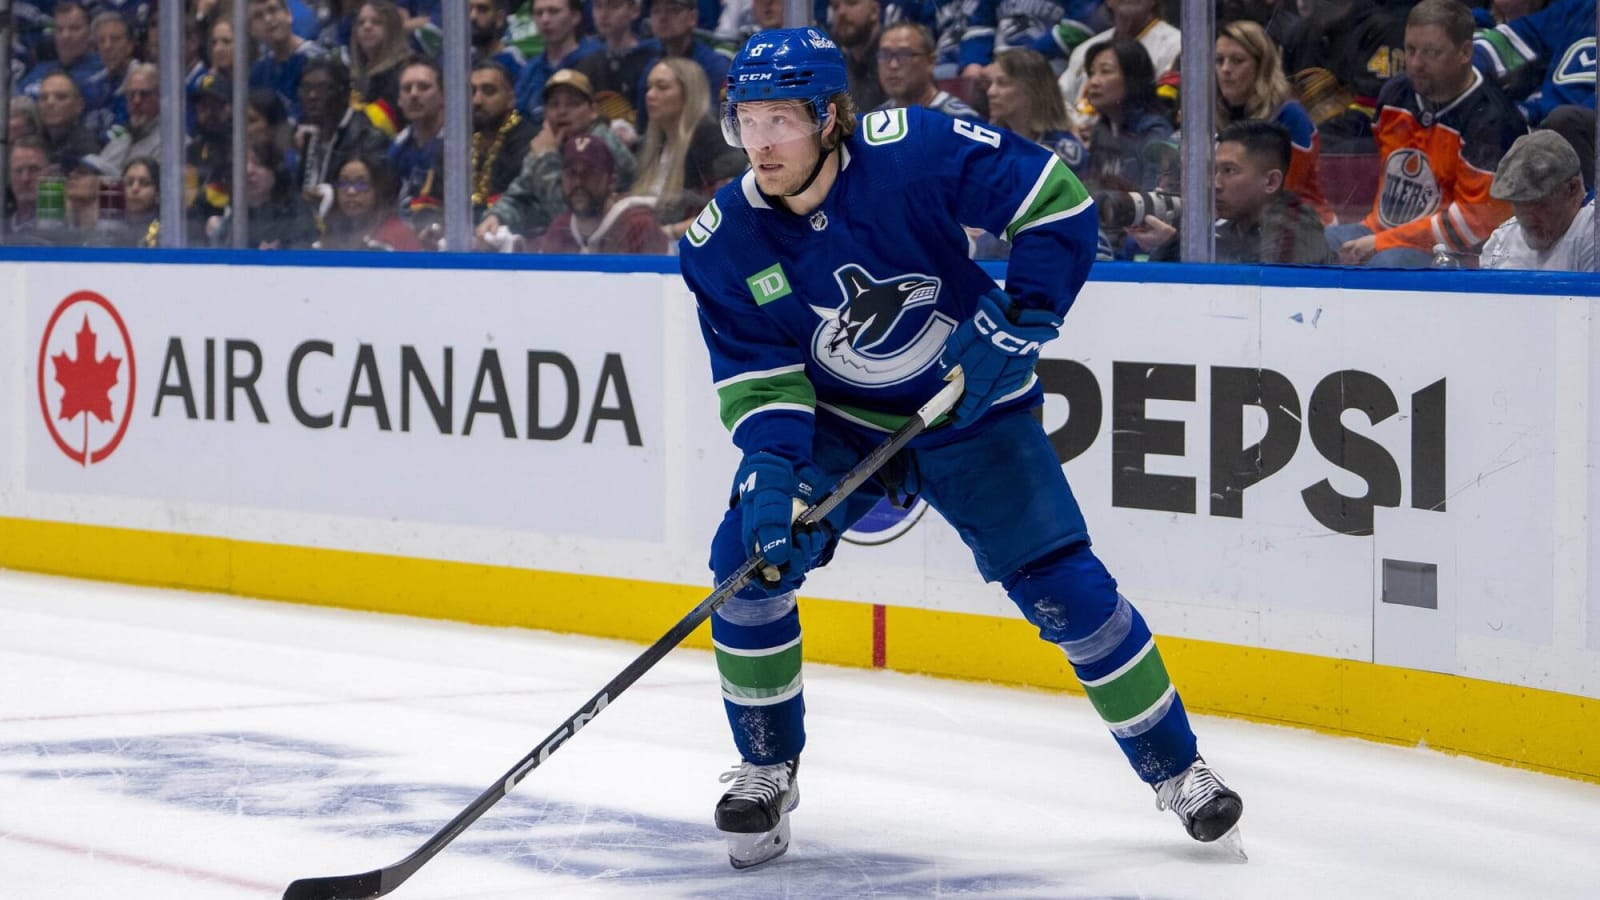 Report: Brock Boeser unavailable for Canucks in Game 7 due to blood clotting